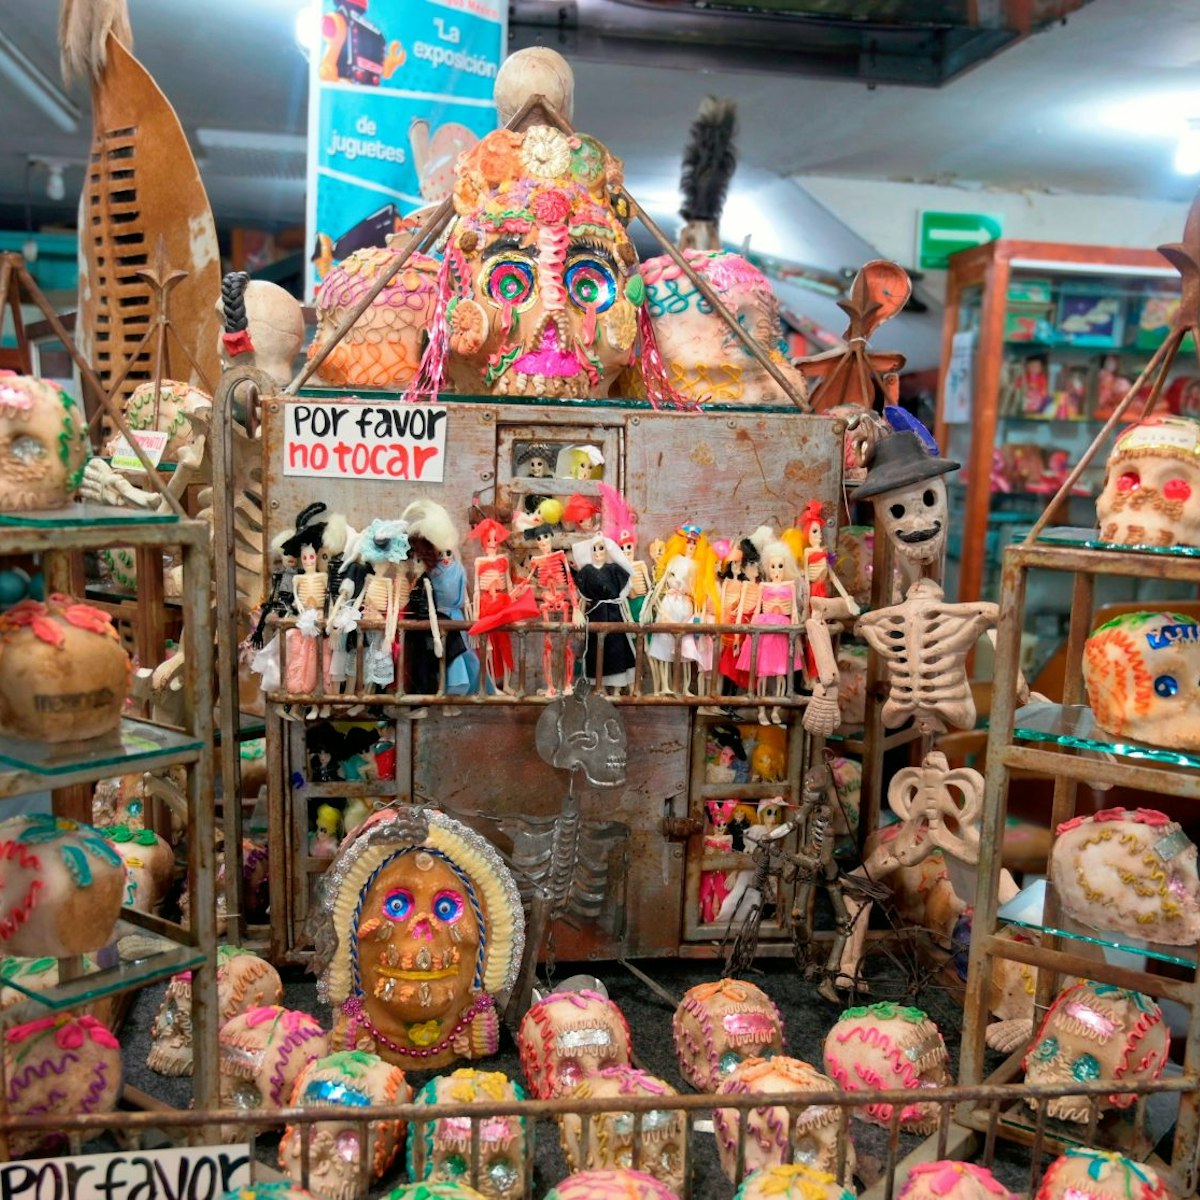 View of sugar skulls, a common gift for children and decoration for the "Day of the Dead", at the "Museo del Juguete Antiguo México" in Mexico City on October 20, 2020. - The collection of skulls is from 1968 and were made as gifts for the different sports delegations that participated in the 1968 Mexico Olympic Games. (Photo by ALFREDO ESTRELLA / AFP) (Photo by ALFREDO ESTRELLA/AFP via Getty Images)